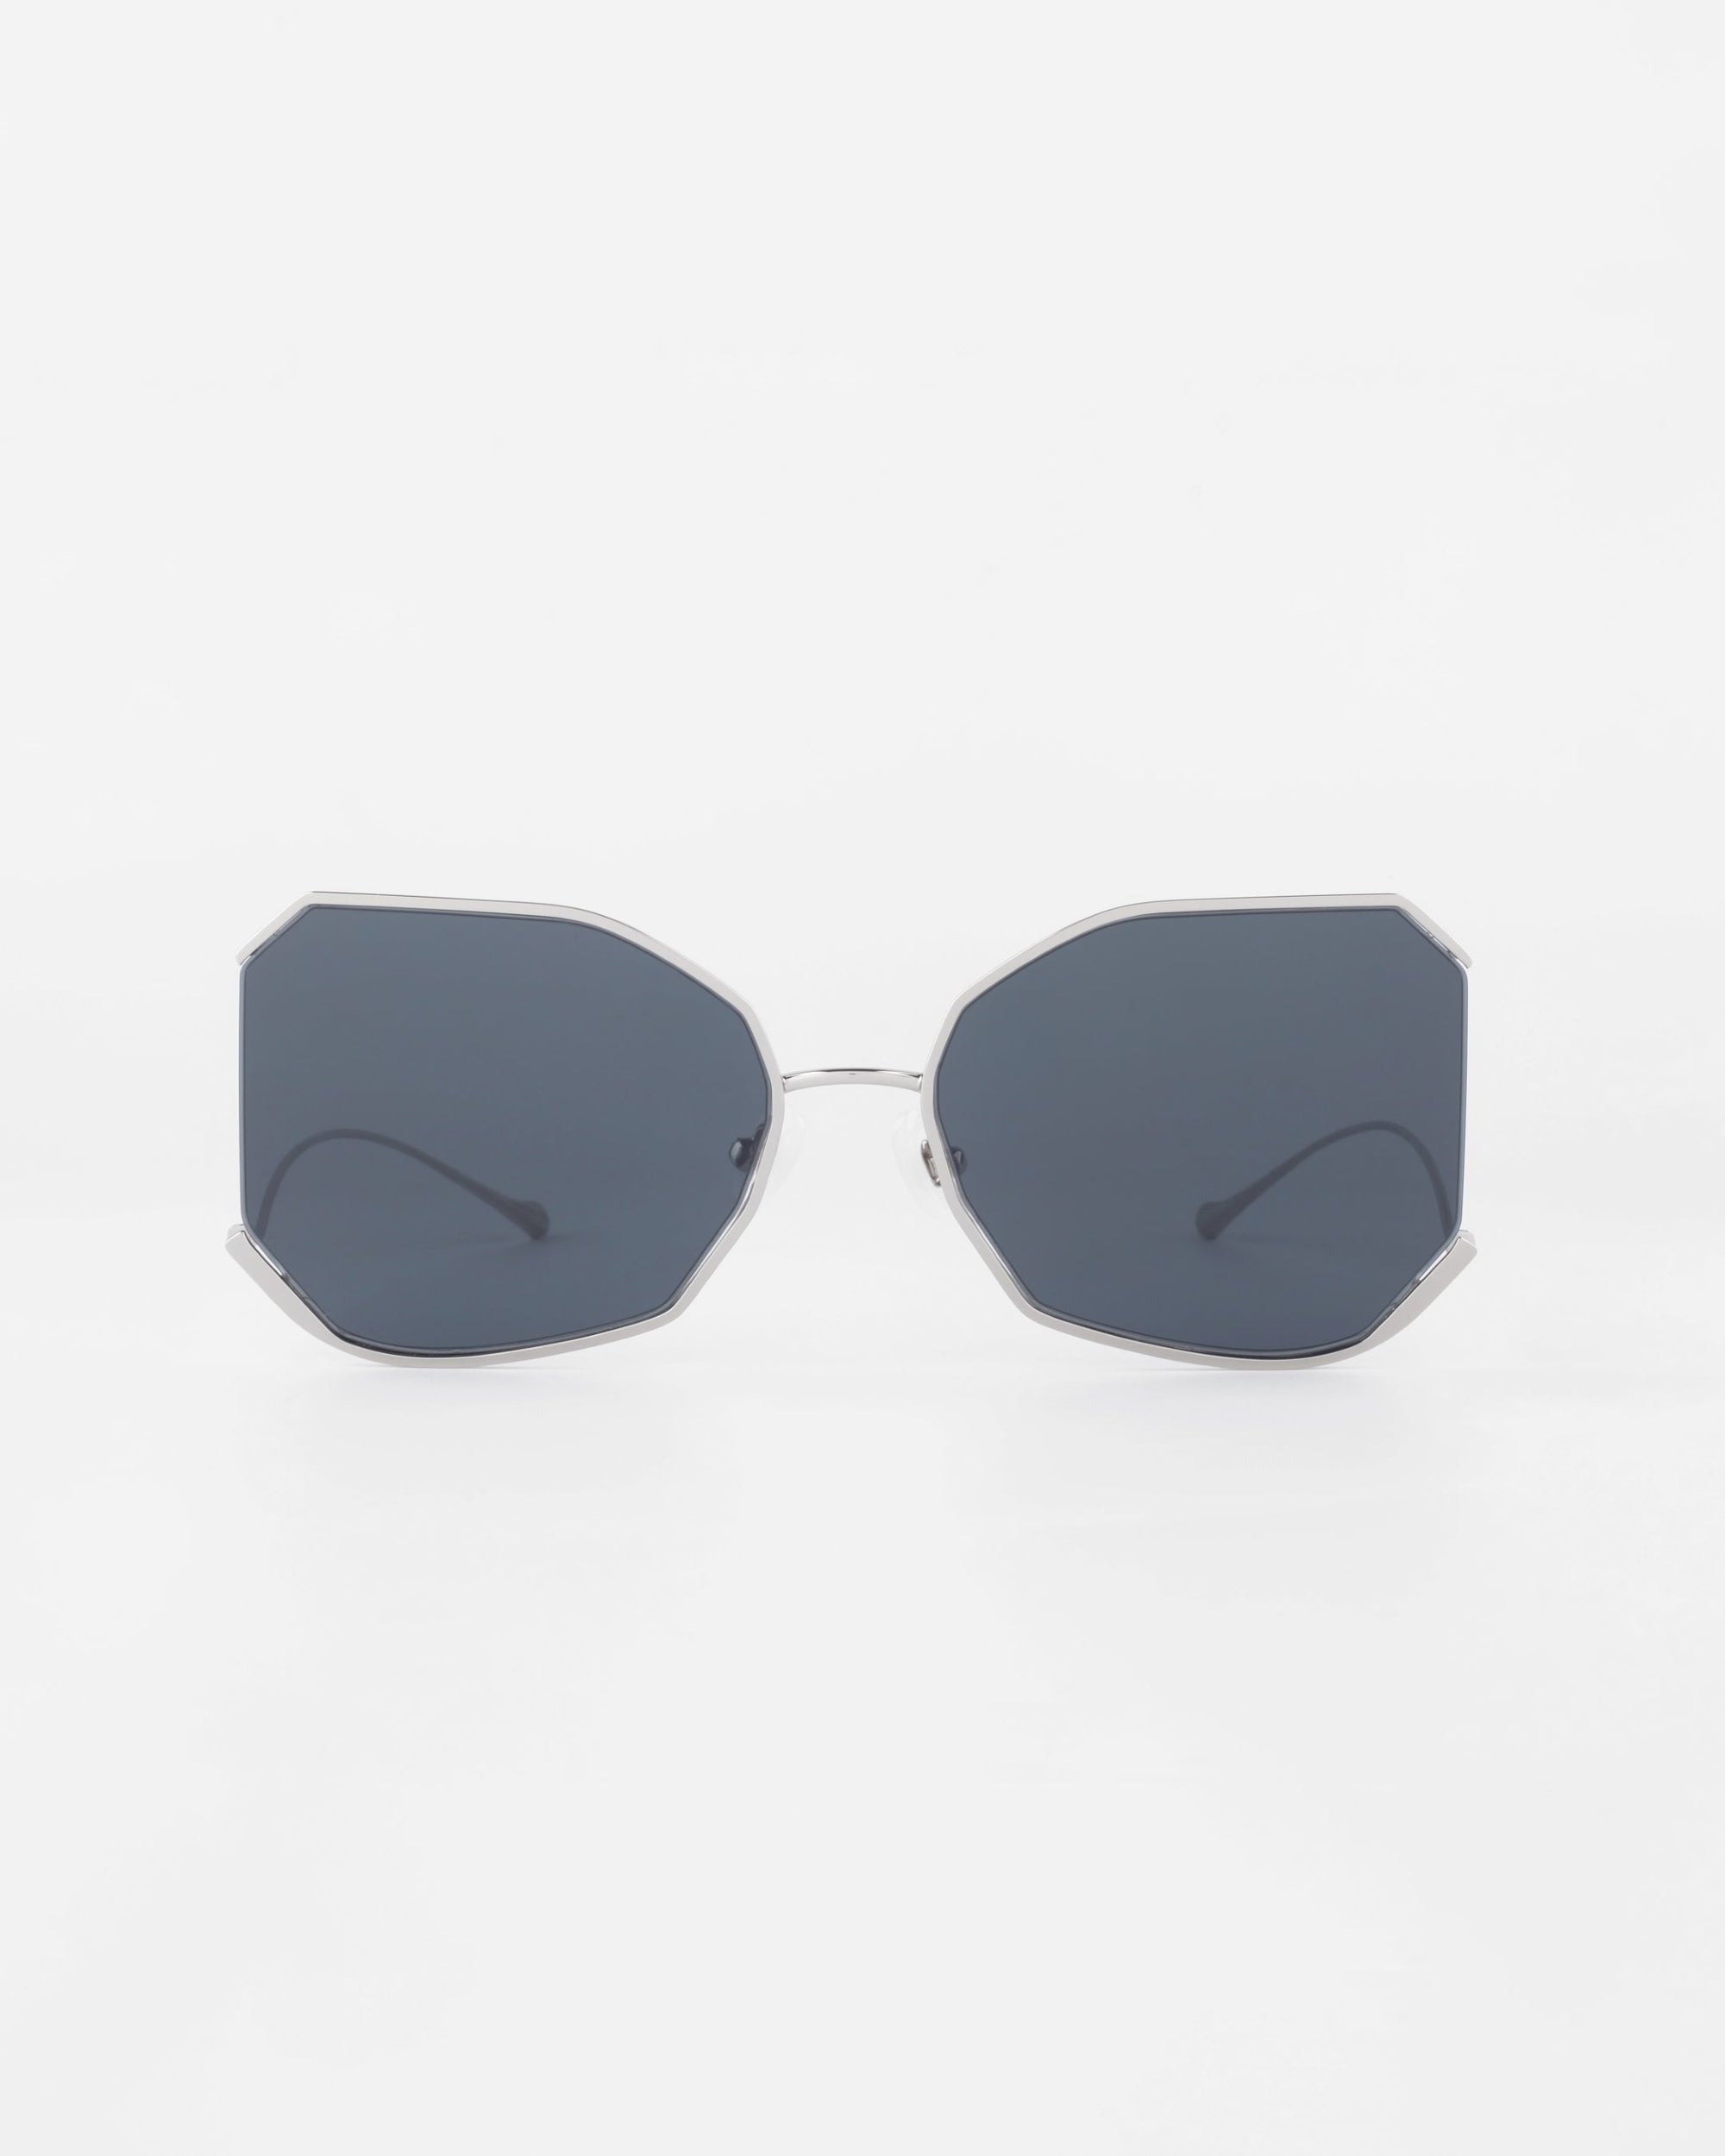 A pair of sunglasses with hexagonal-shaped, dark lenses and a thin, gold-plated stainless steel frame. The lightweight Nylon lenses offer UVA &amp; UVB protection. The background is white, and the &quot;Painter&quot; by For Art&#39;s Sake® sunglasses are centered in the image.